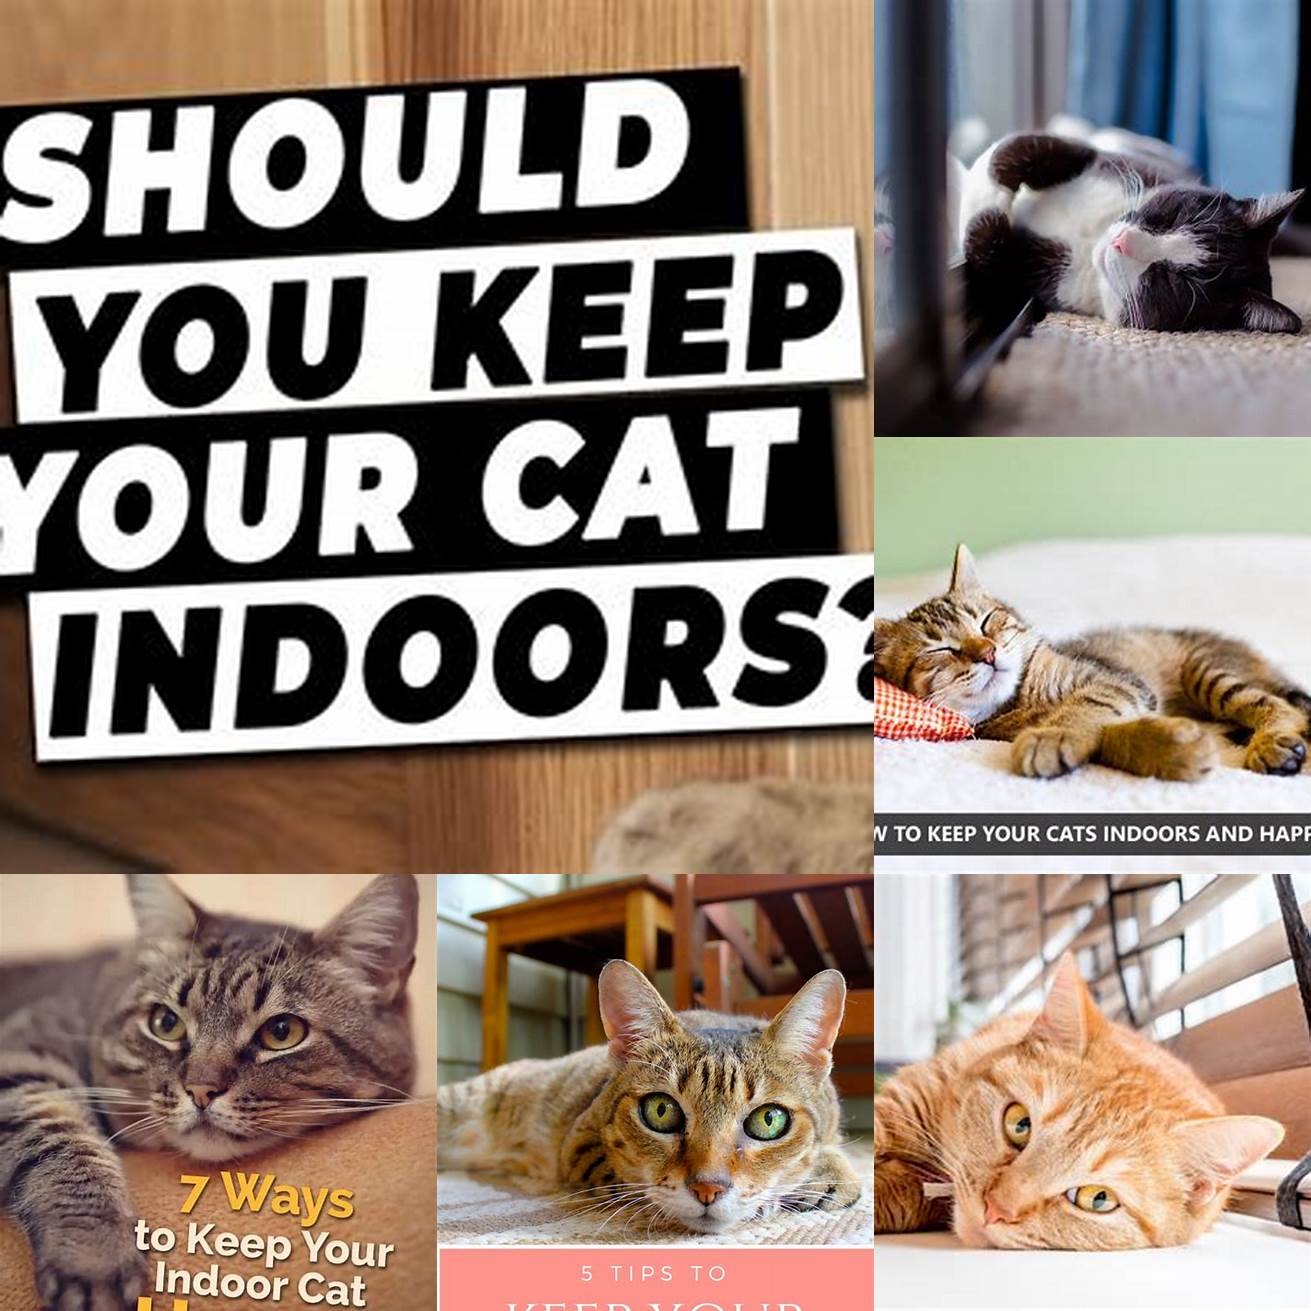 Keep your cat indoors as much as possible